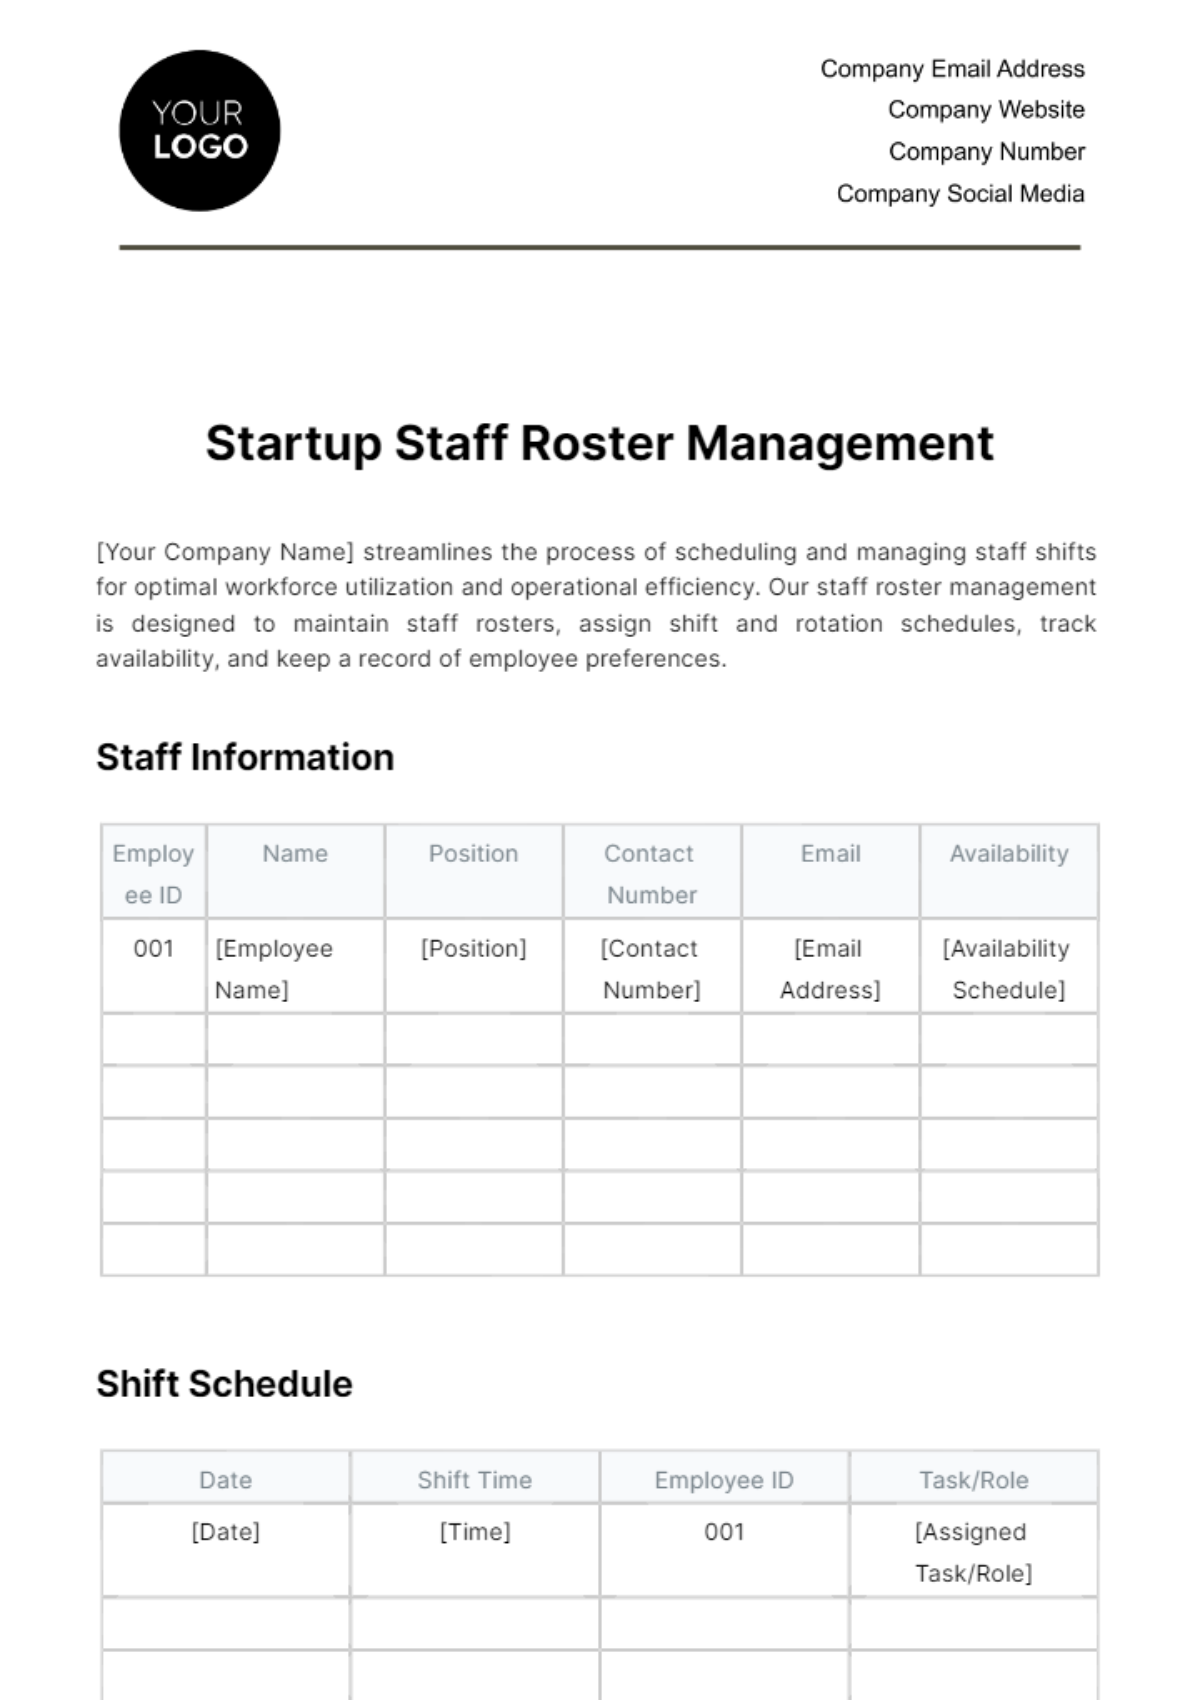 Startup Staff Roster Management Template